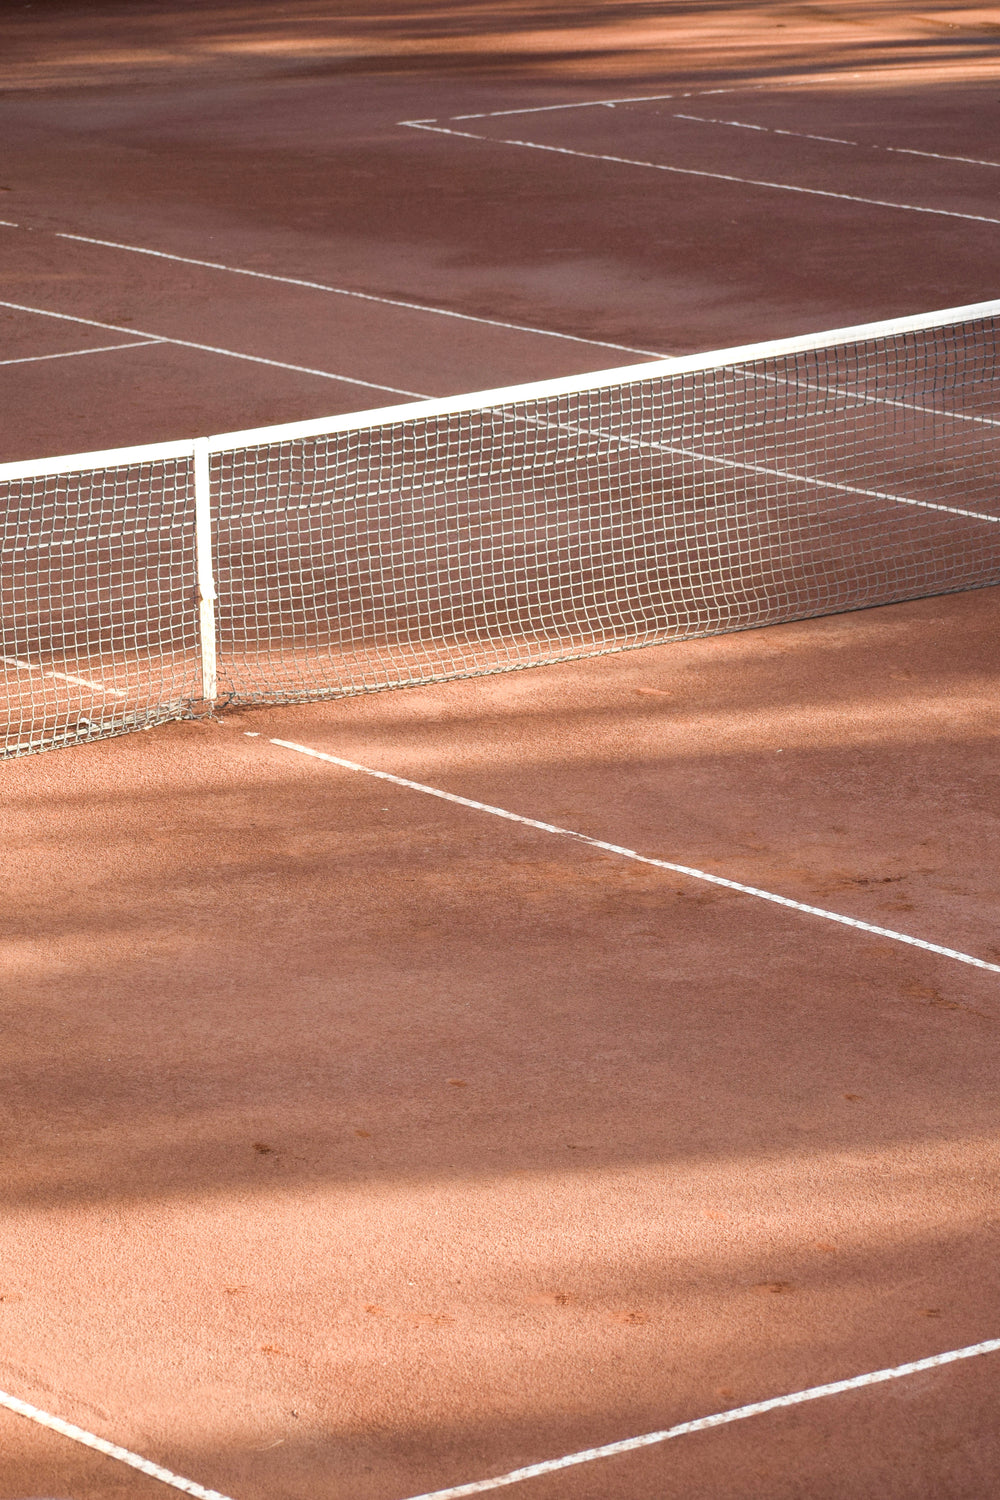 Tennis court in Sicily photography